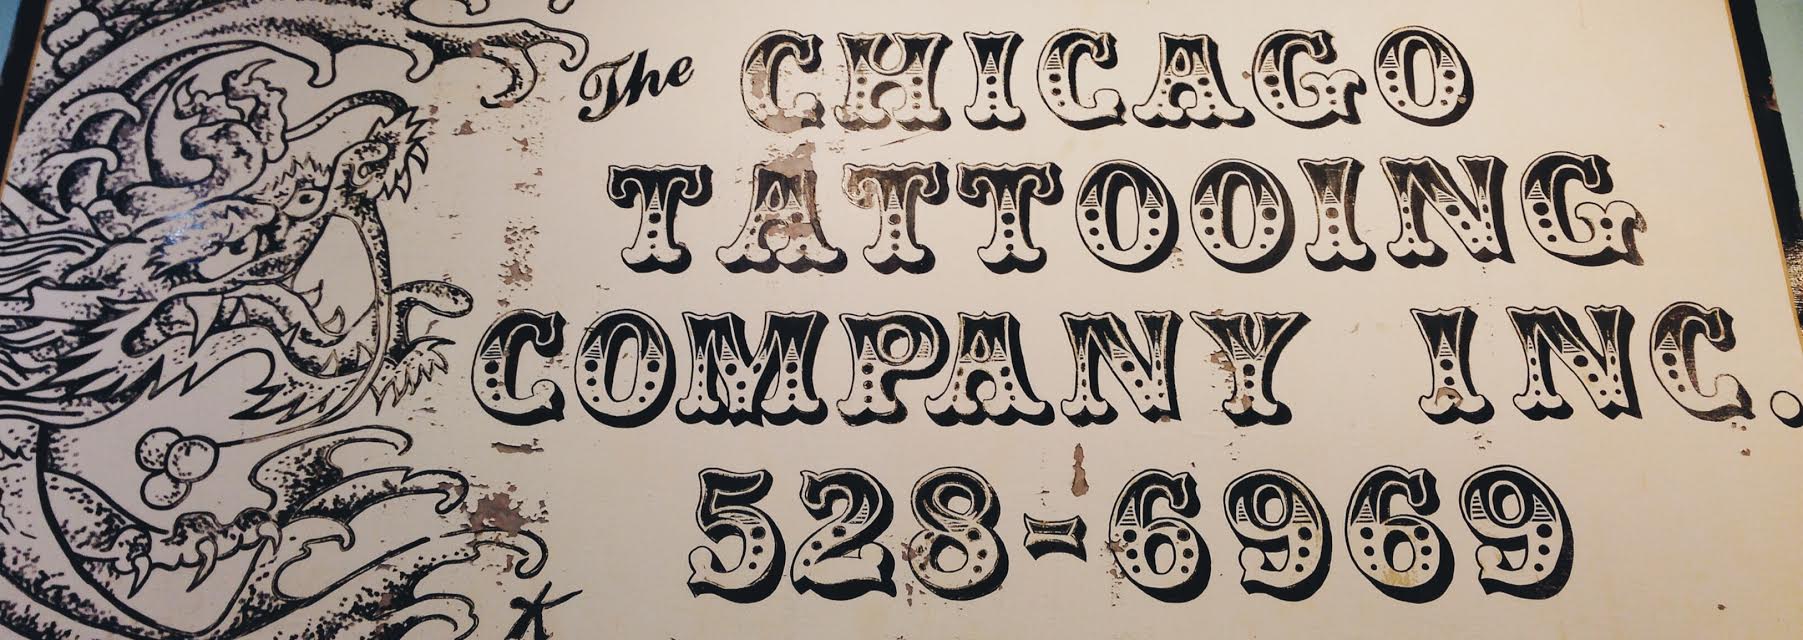 History – Chicago Tattoo & Piercing Co.